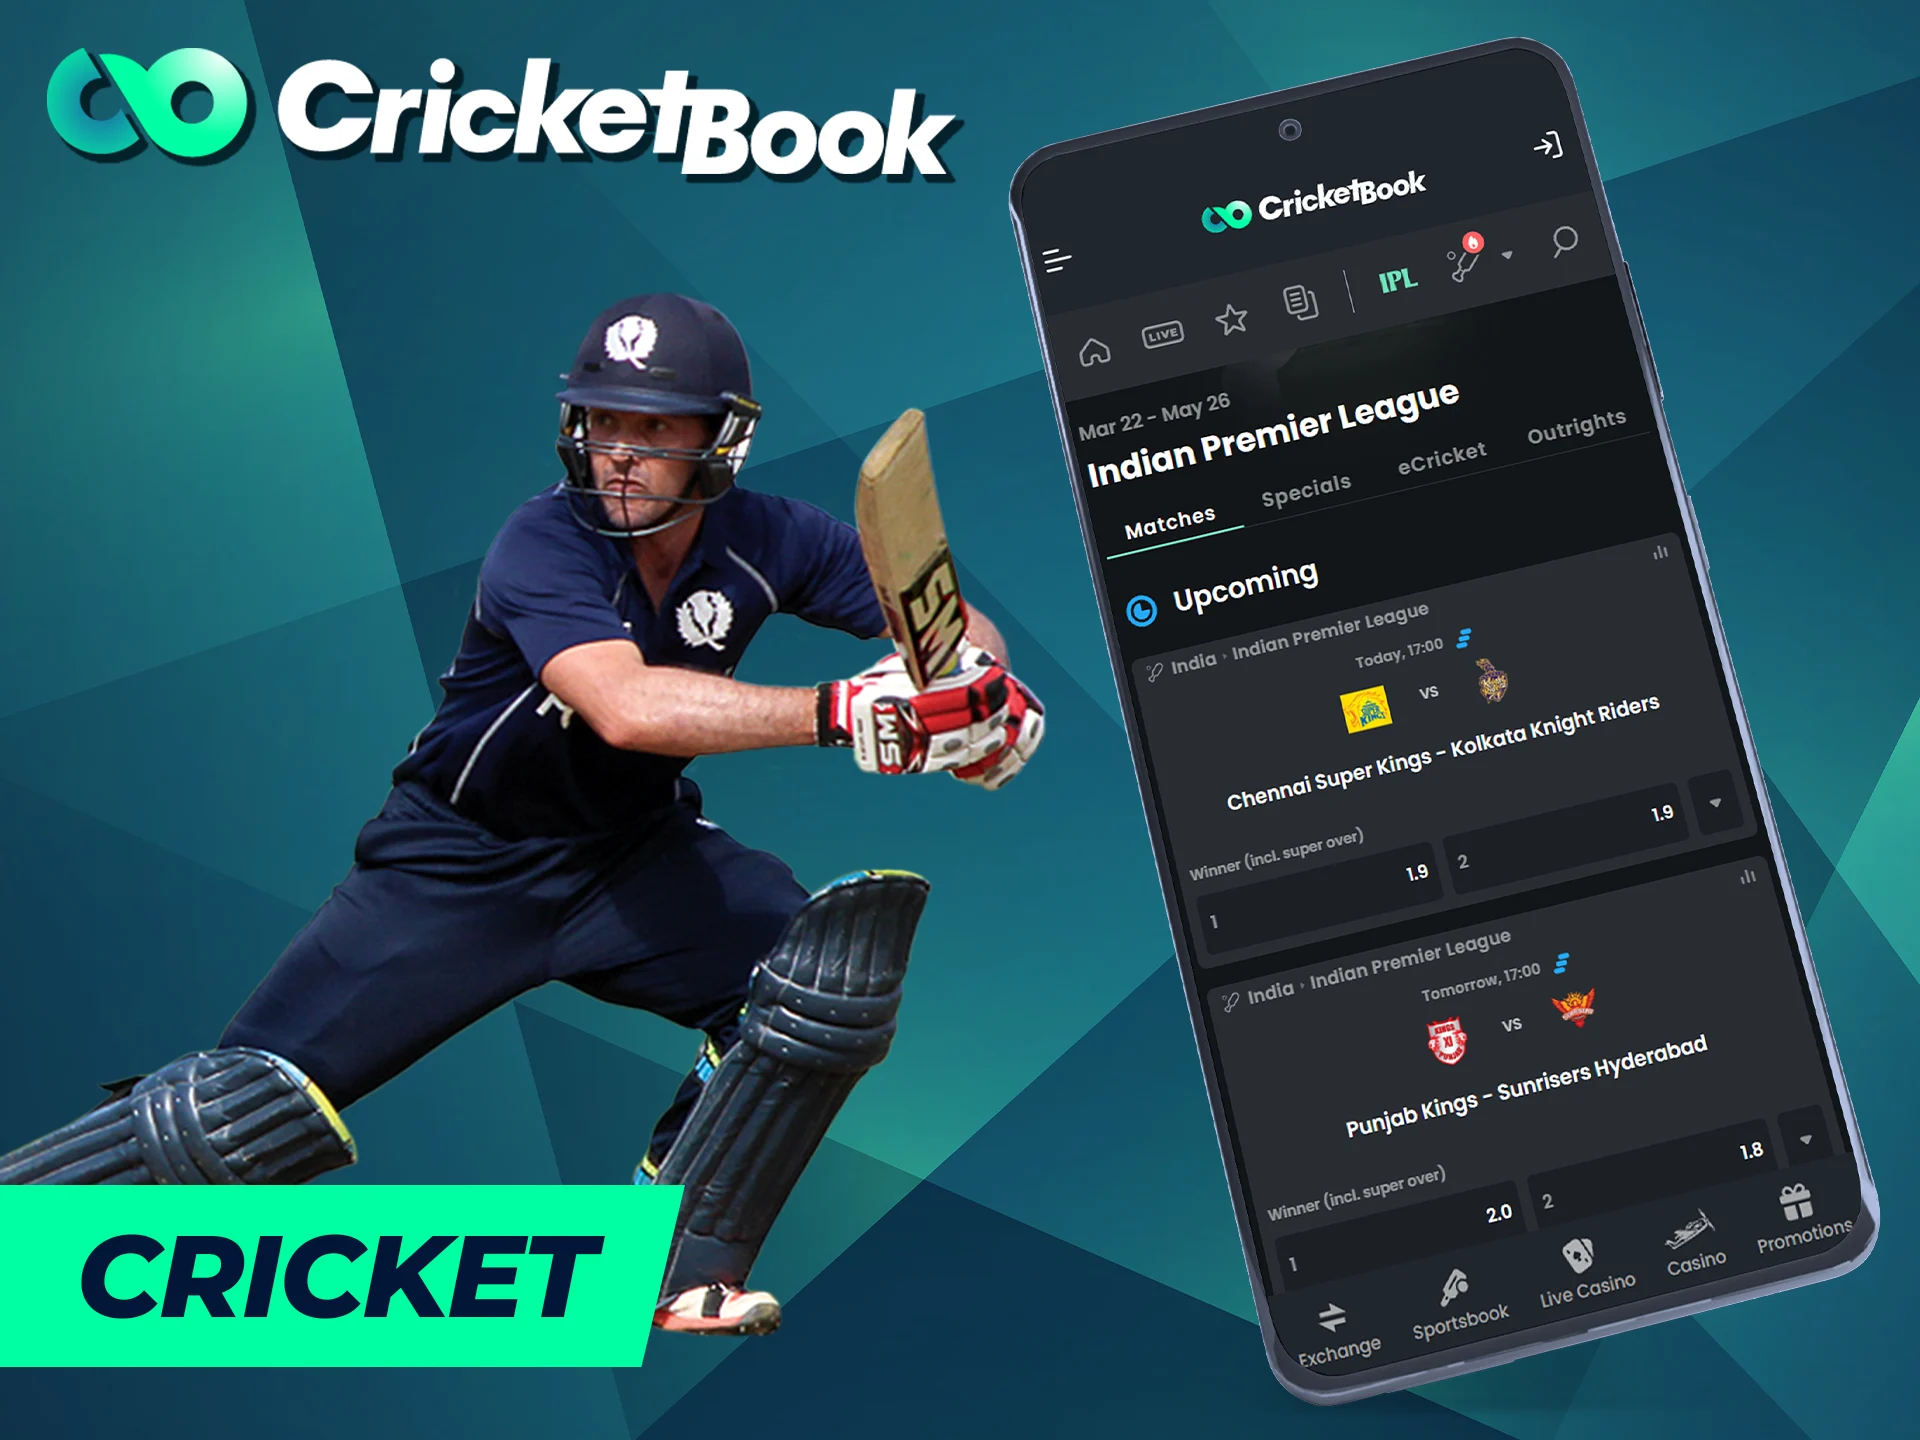 Cricket is one of the most popular sports to bet on at CricketBook.